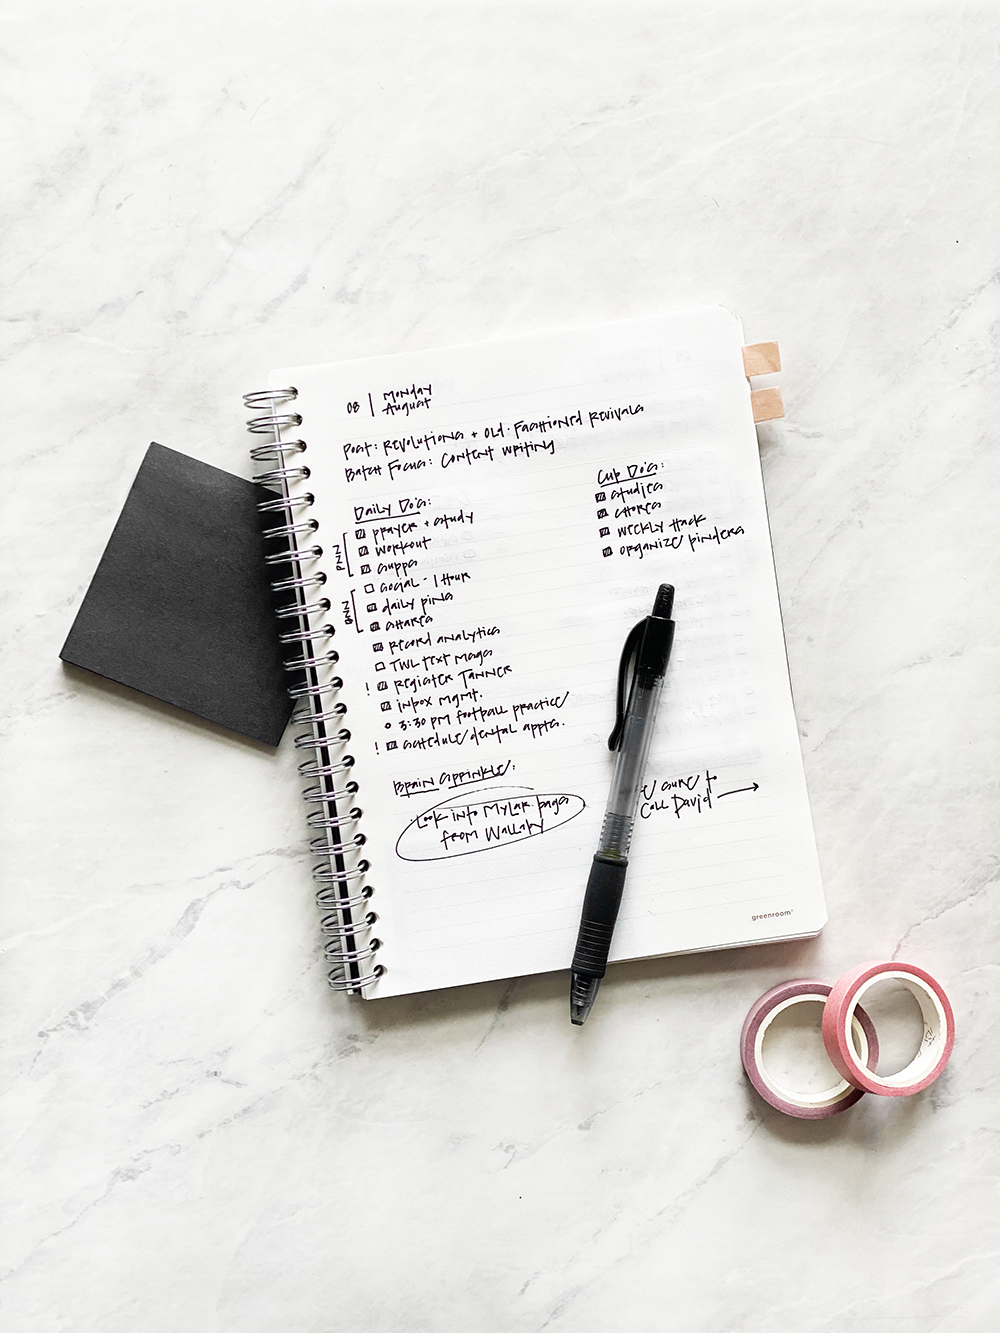 As a busy working mom of five (who also home educates those five cute cubs), I wanted an easy approach to keep track of things. Don't get me wrong, I love certain systems and apps and use them for other areas of my business. But for my day-to-day tasks and what I need to tackle? I want to put pen to paper. I am sharing with you about bullet journaling and how I manage my to-do list over on KaraLayne.com!